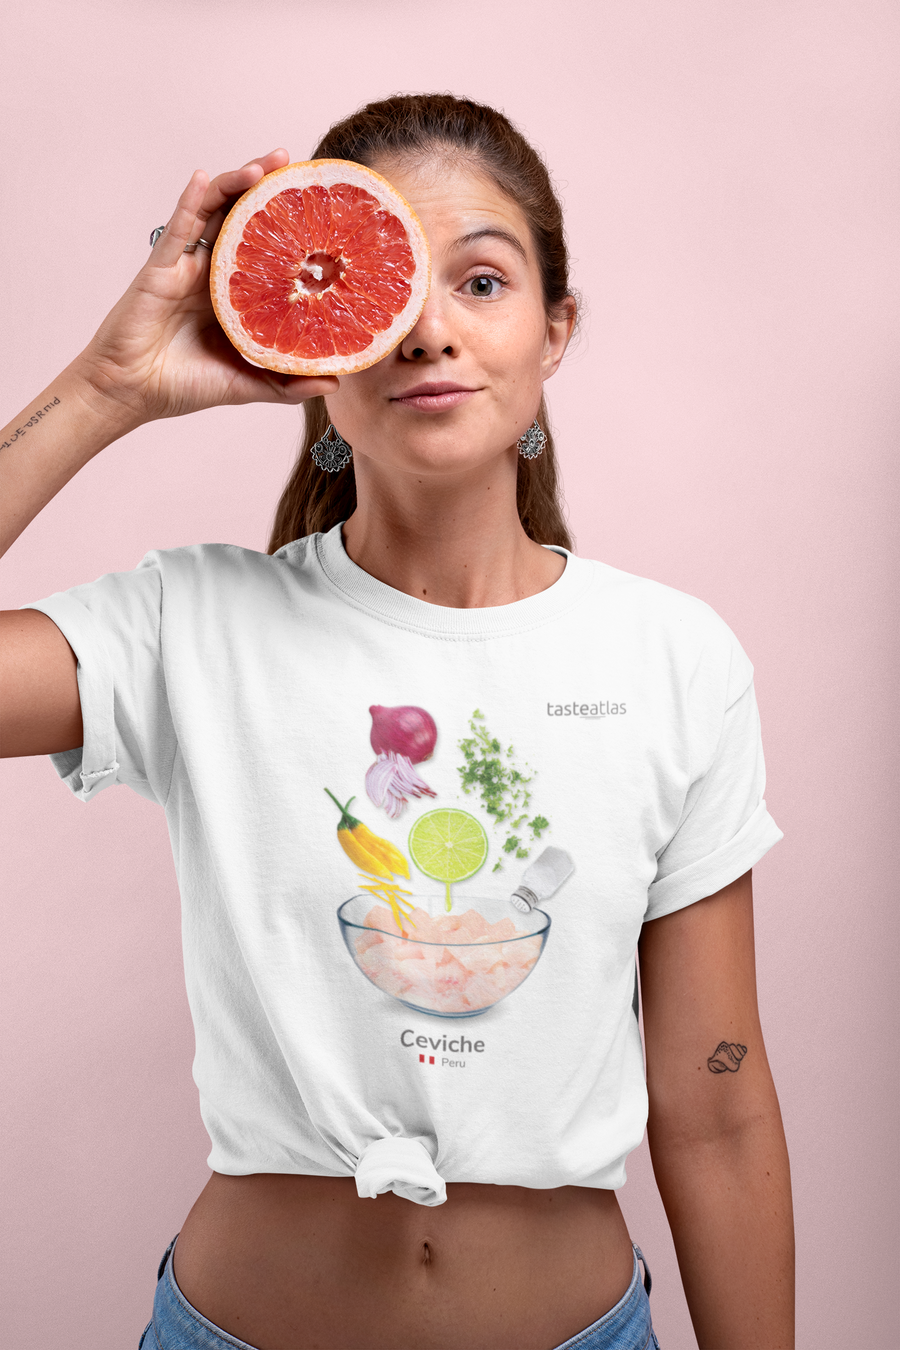 woman standing in front of a pink wall wearing ceviche t-shirt